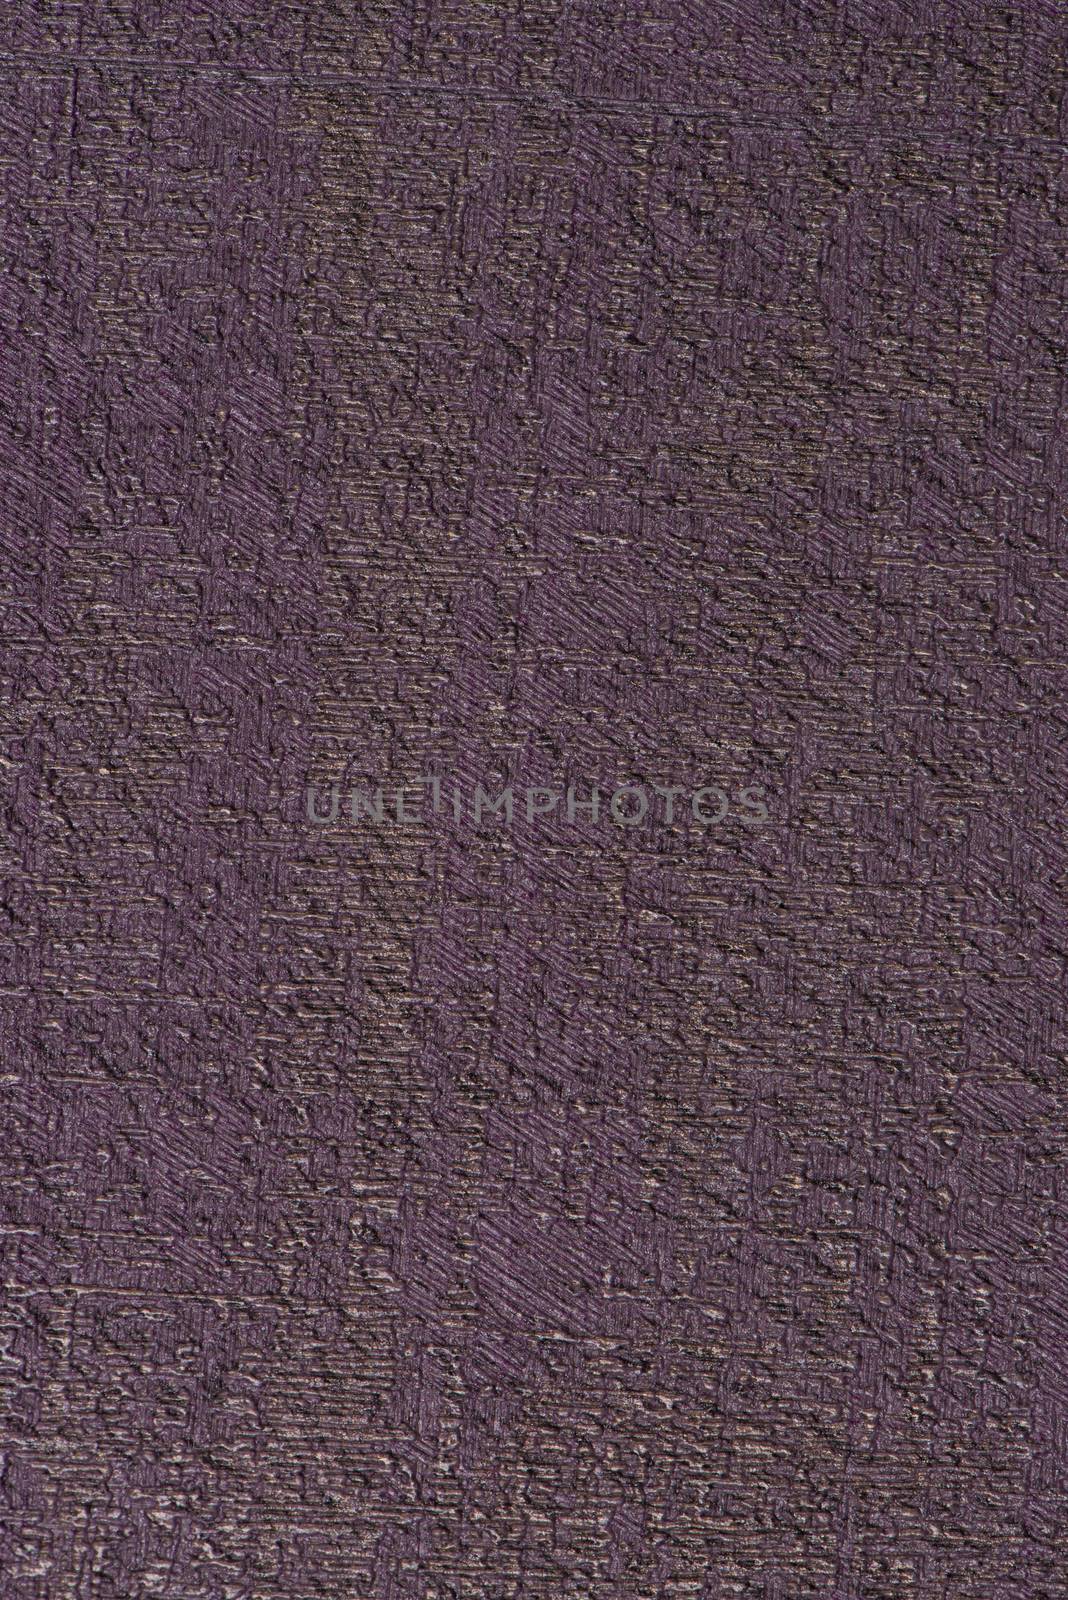 Purple wallpaper embossed texture for background.